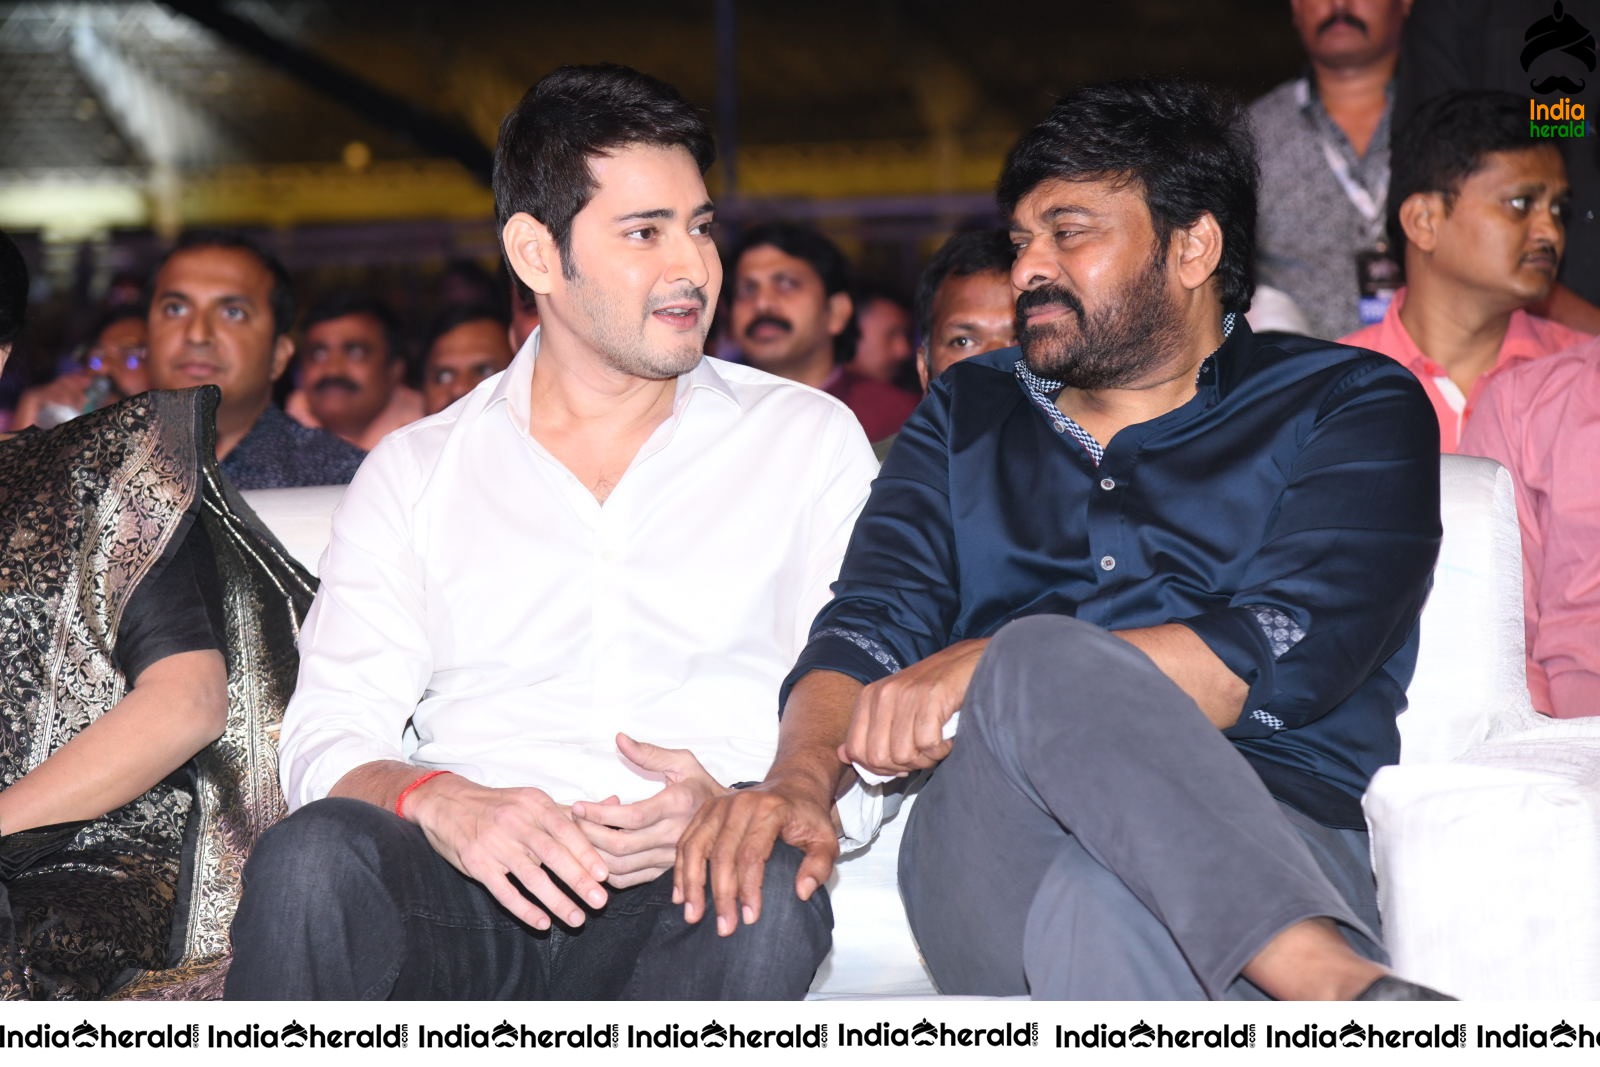 Some More Candid moments from Sarileru Neekevvaru event Set 1